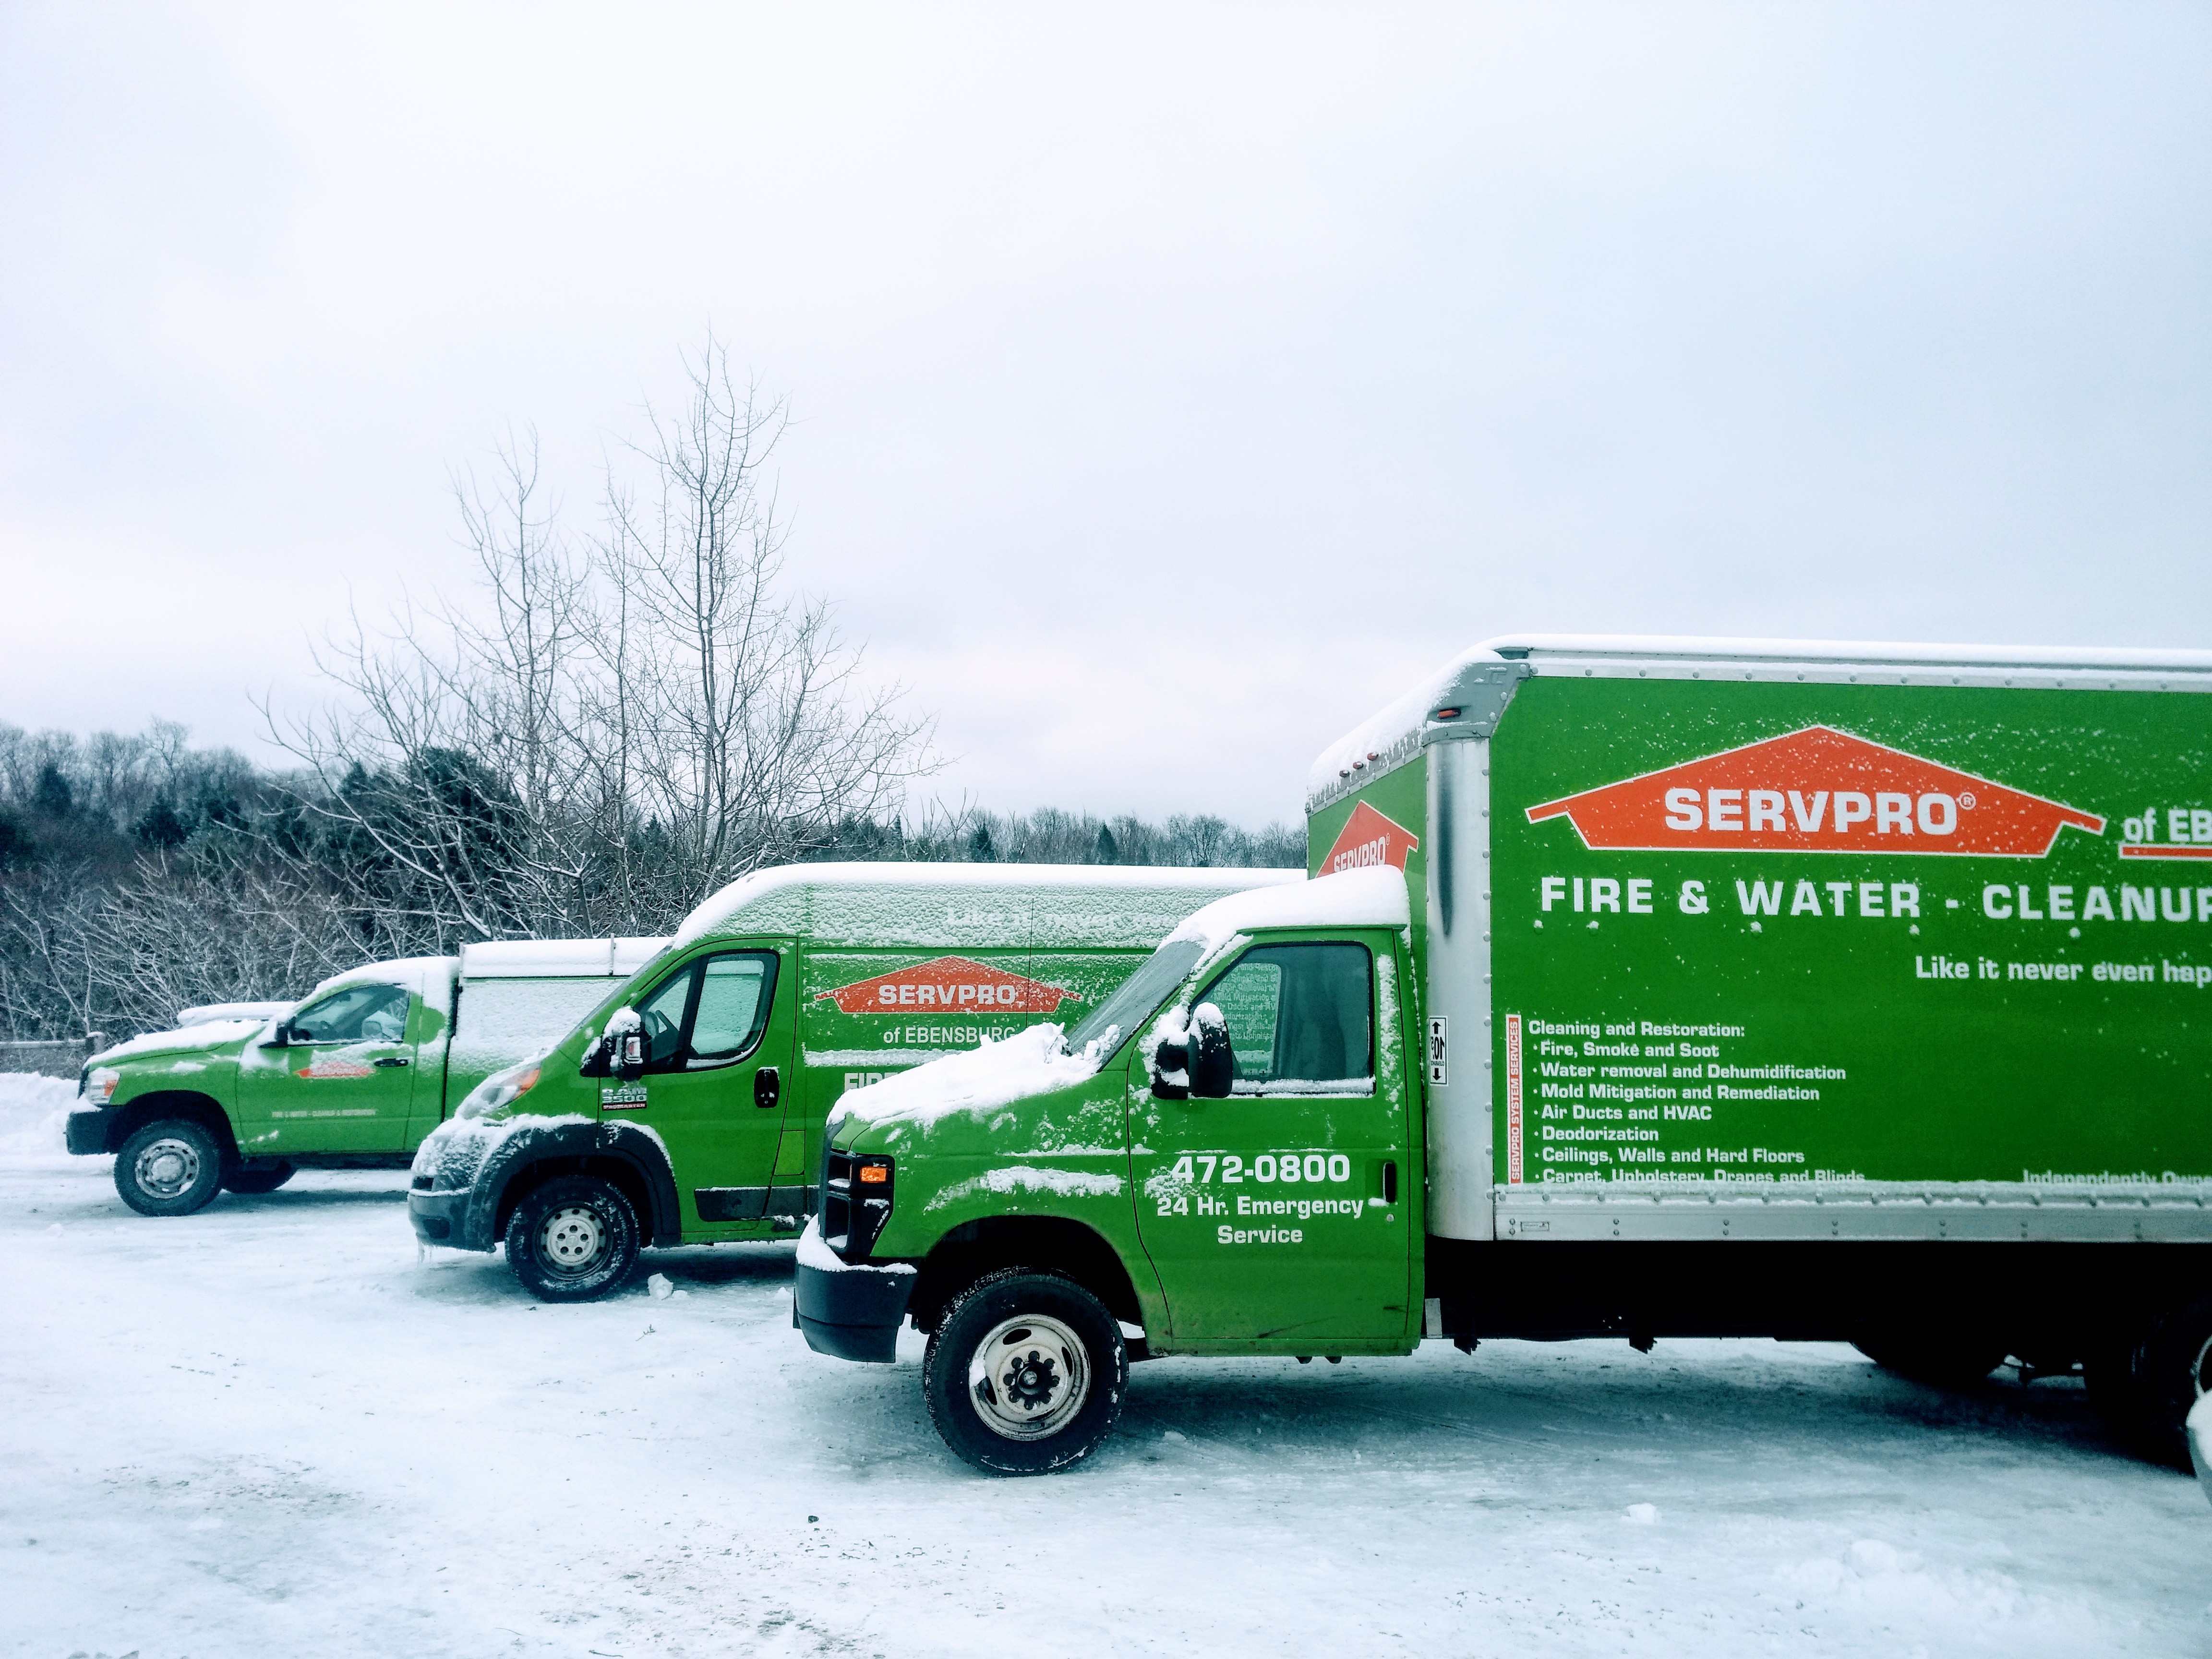 No matter rain or sunshine, our SERVPRO of Ebensburg team is on standby and ready to respond to your residential or commercial loss.